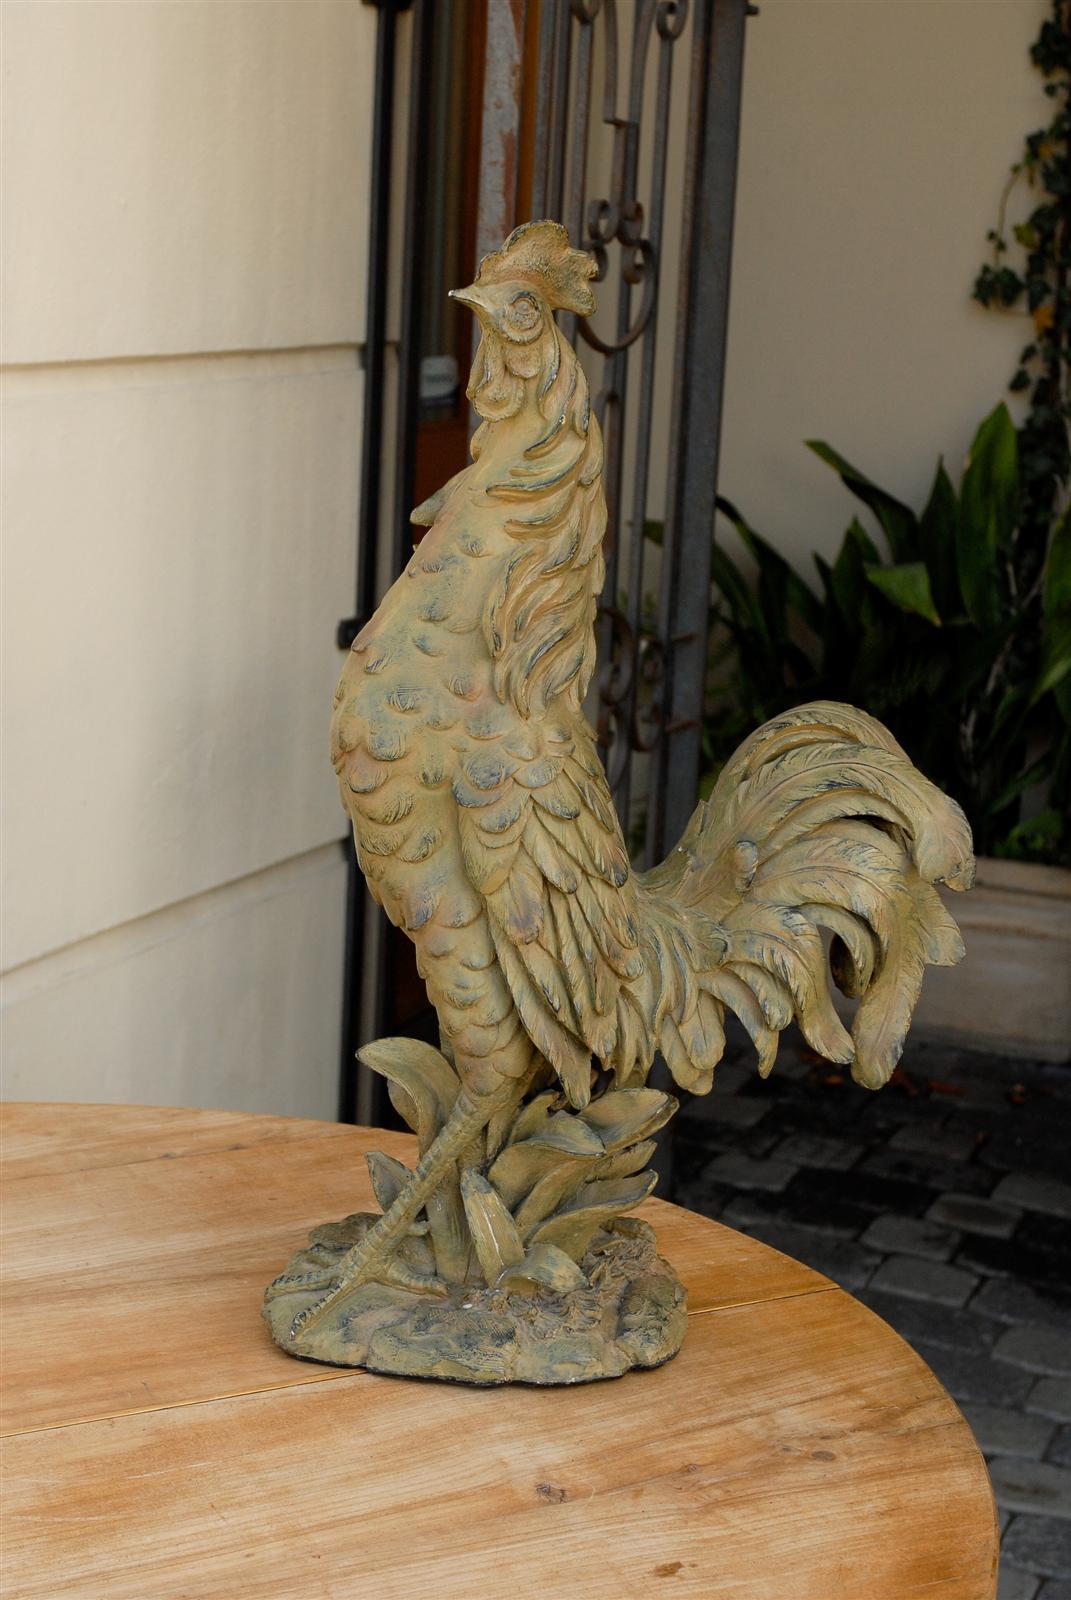 A French vintage rooster sculpture from the mid-20th century. We all know that eagles are the symbol for America. Roosters are the French national emblem. This particular one is made of light colored composition and stands tall as it surveys the